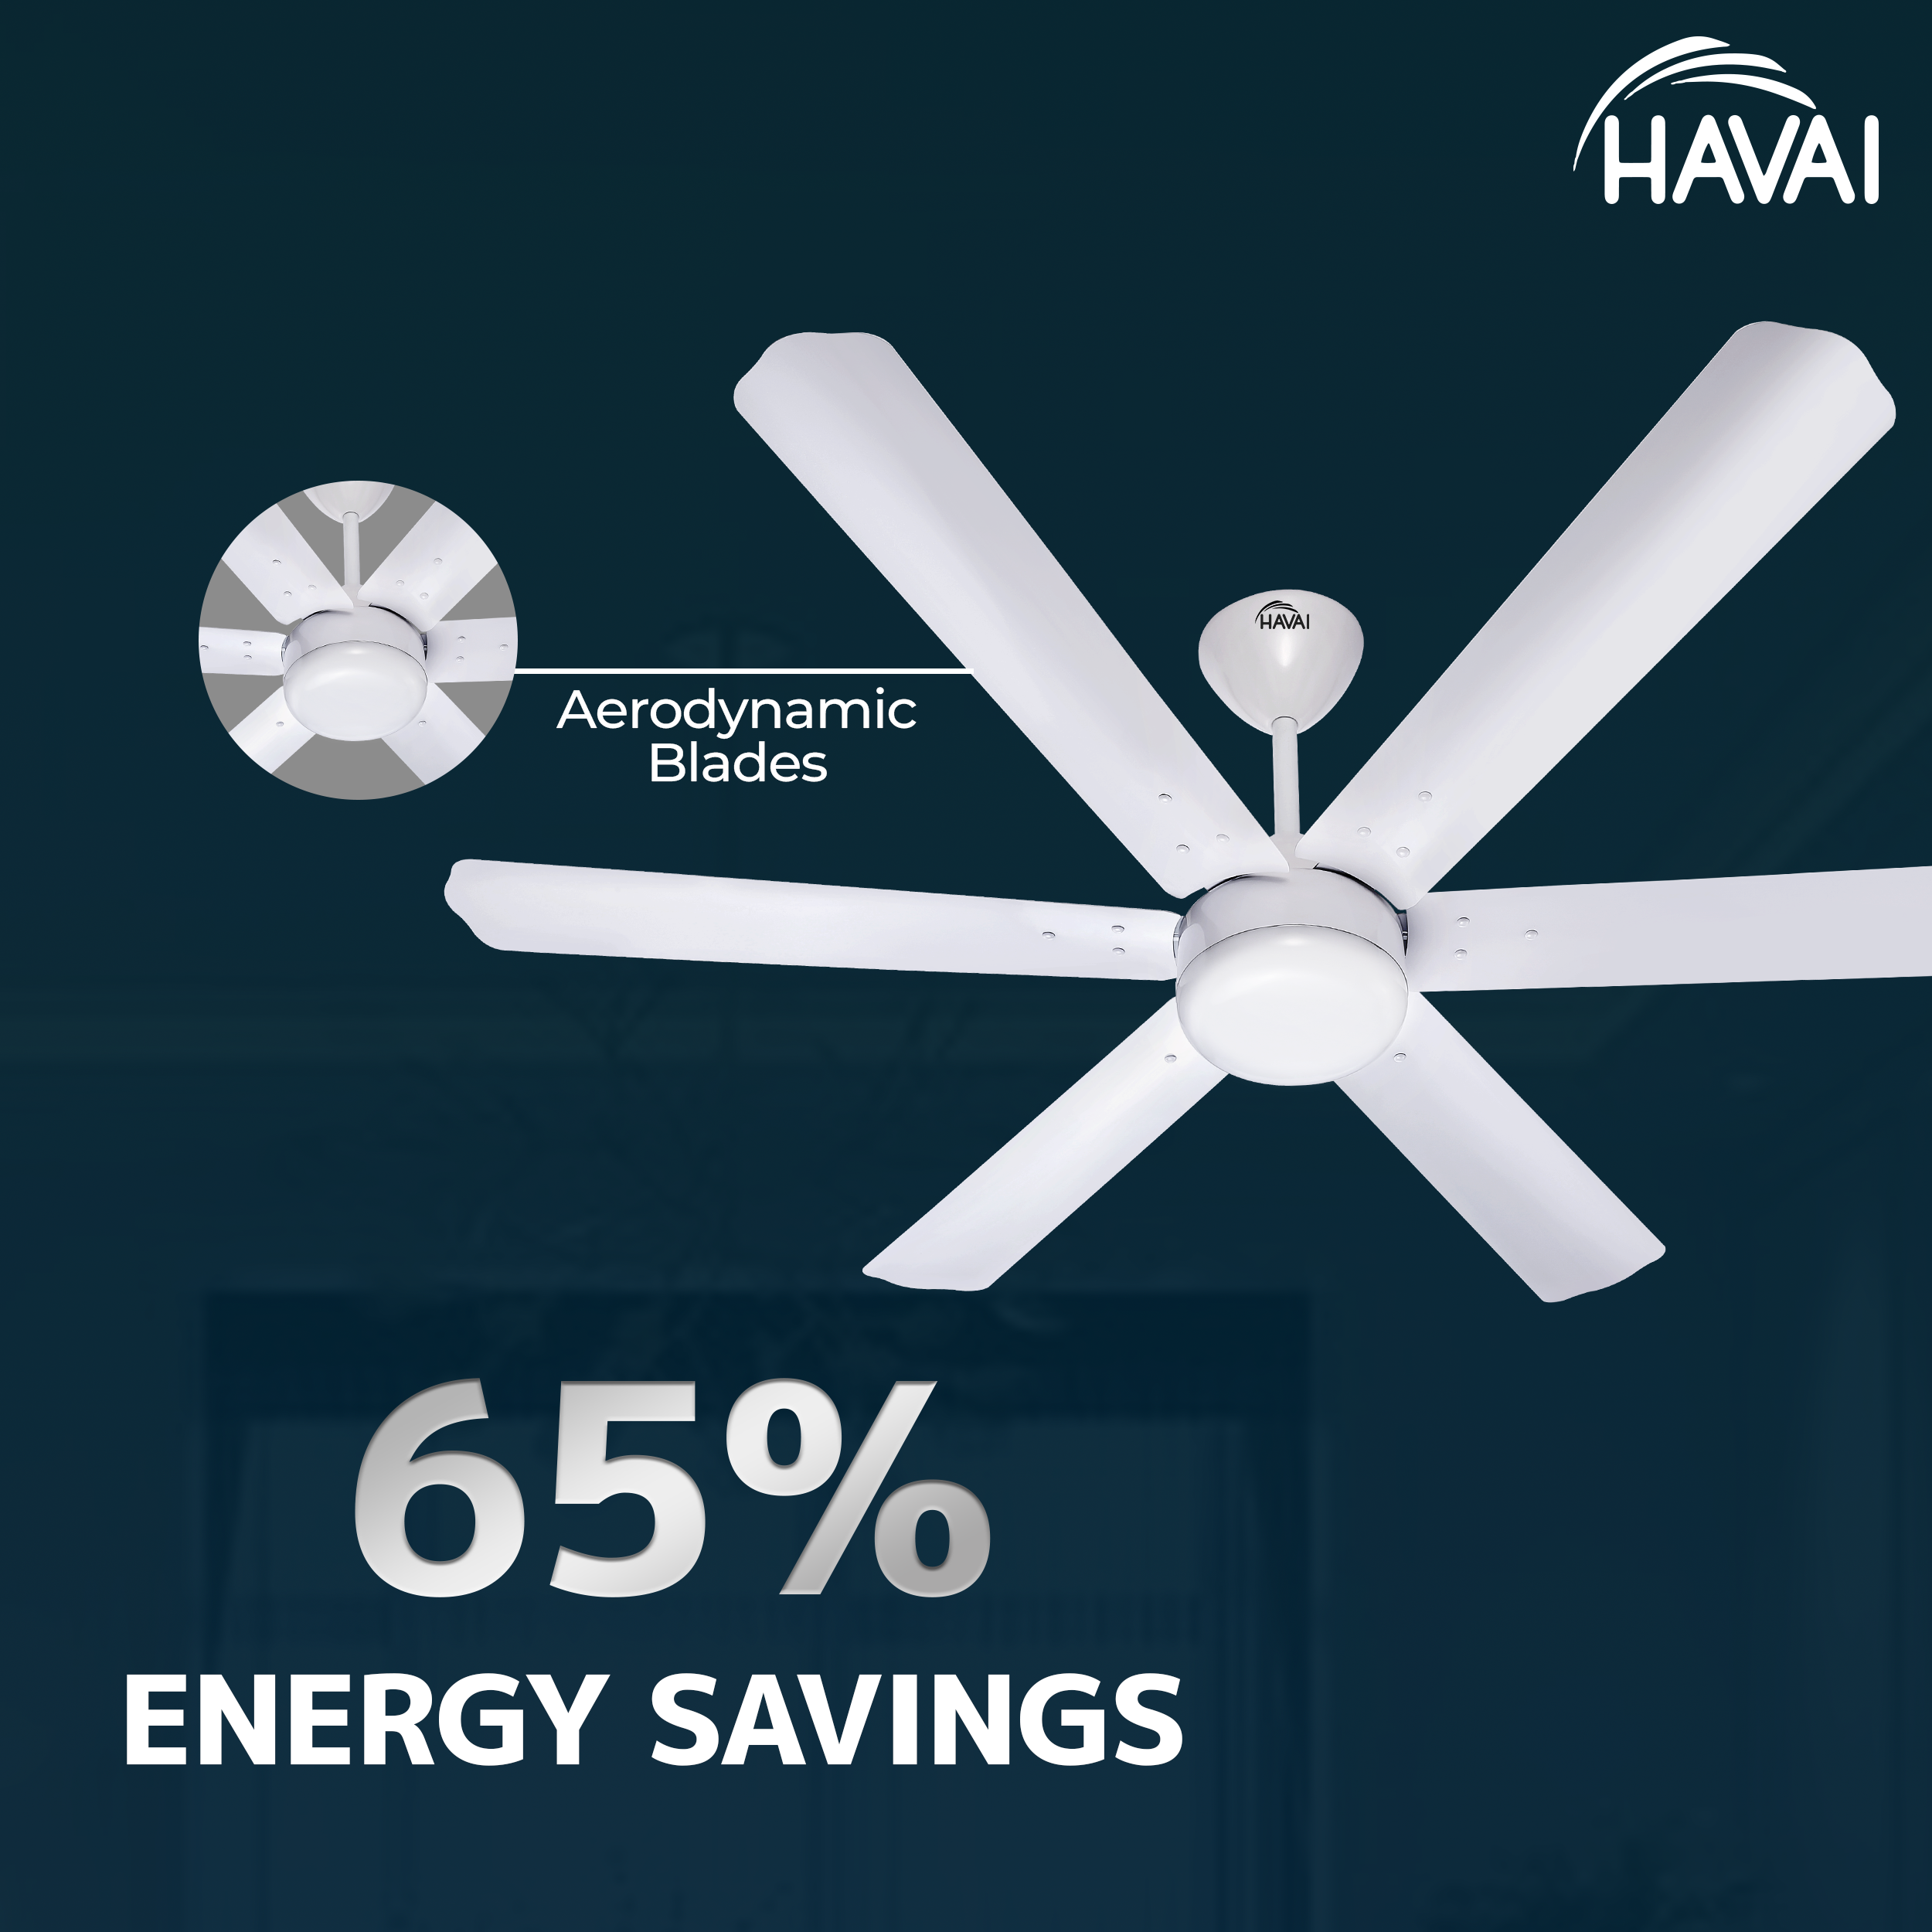 HAVAI Spinel BLDC Ceiling Fan 35W, 1200mm Blade with Remote - White,0.5W LED Light